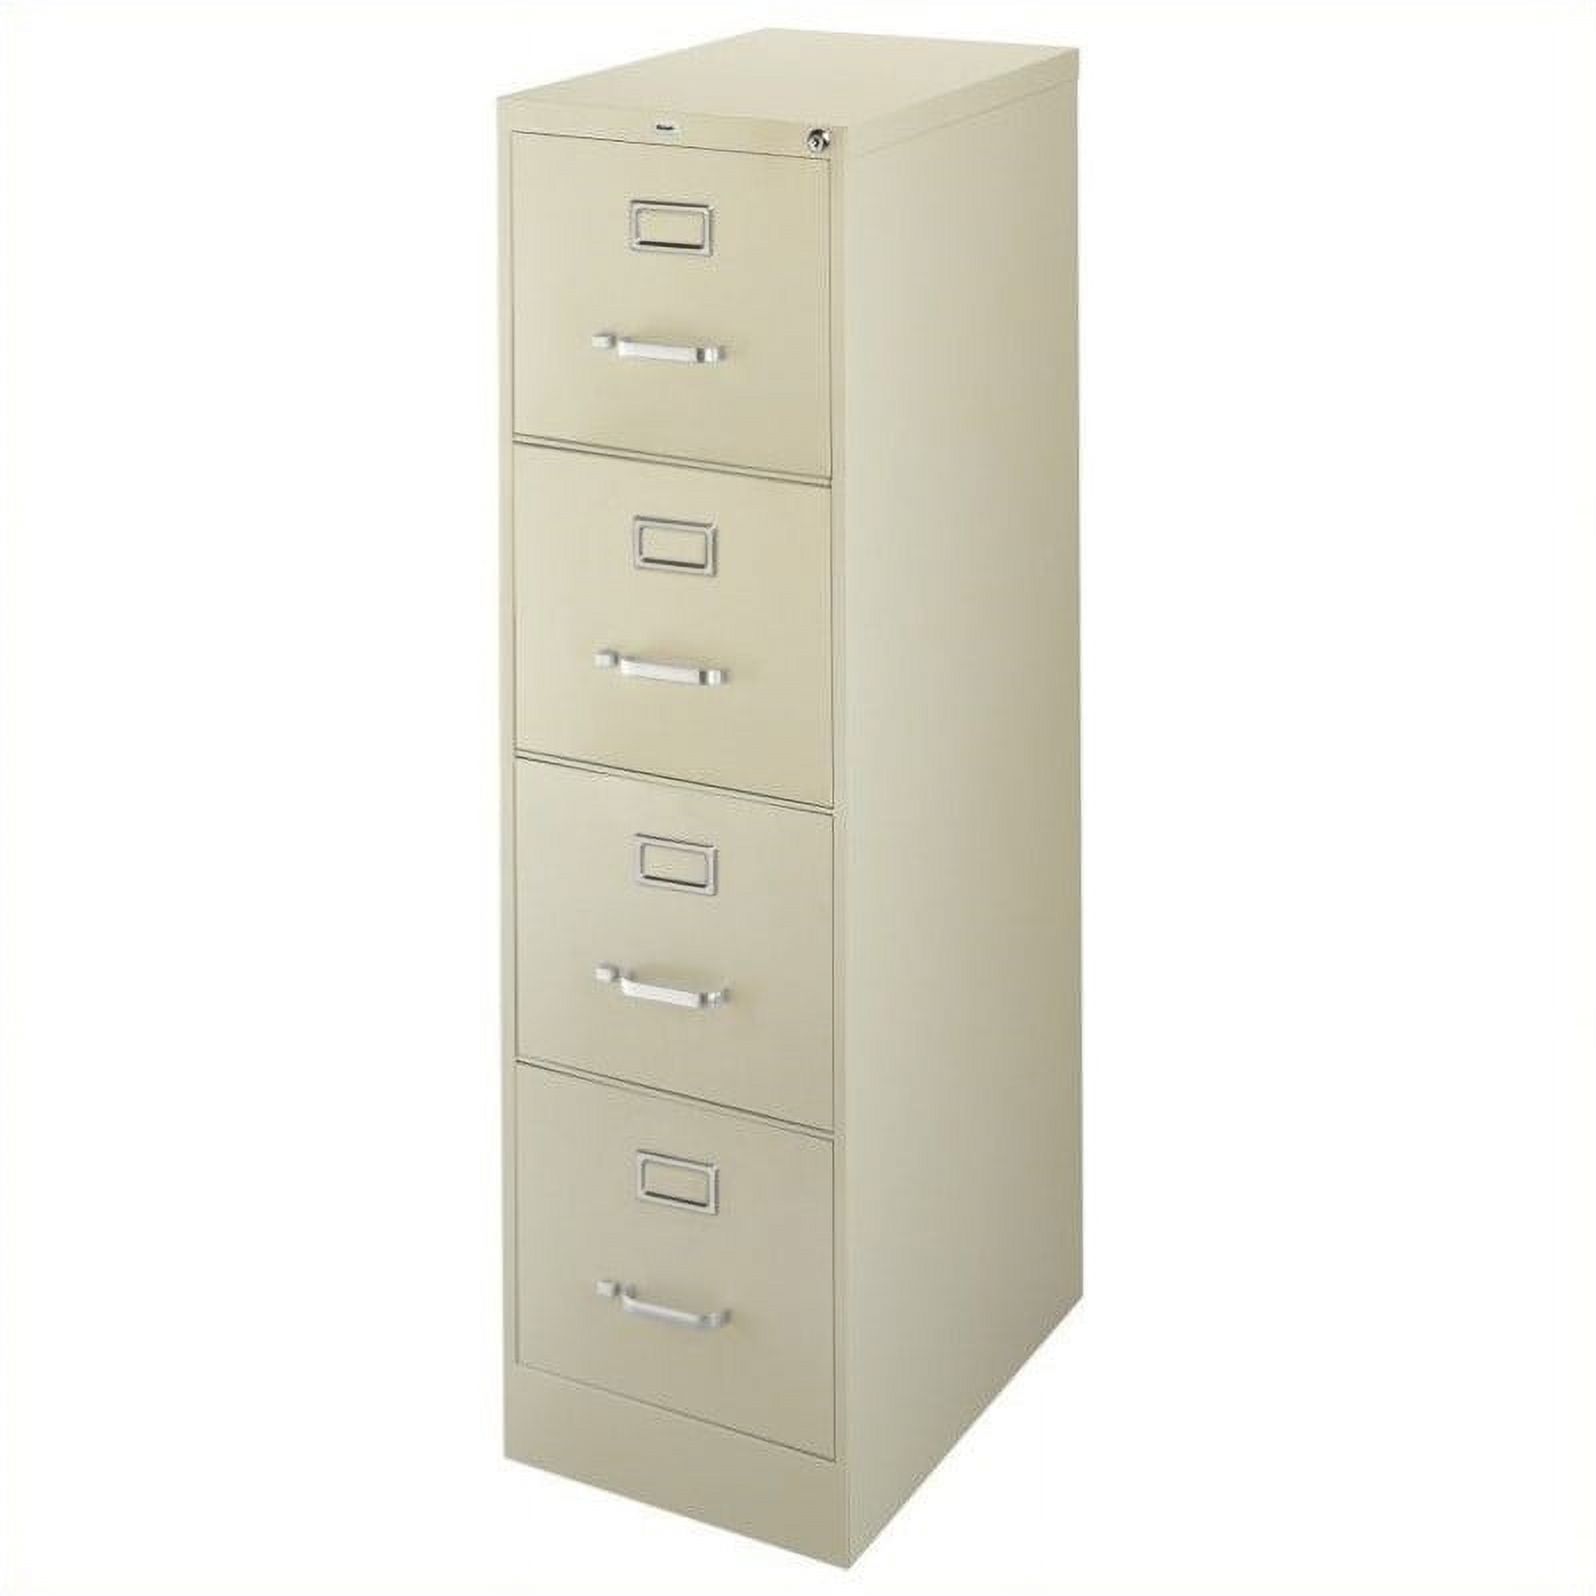 2 Piece Value Pack 4 and 2 Drawer Filing Cabinet in Putty and Blue - image 2 of 3